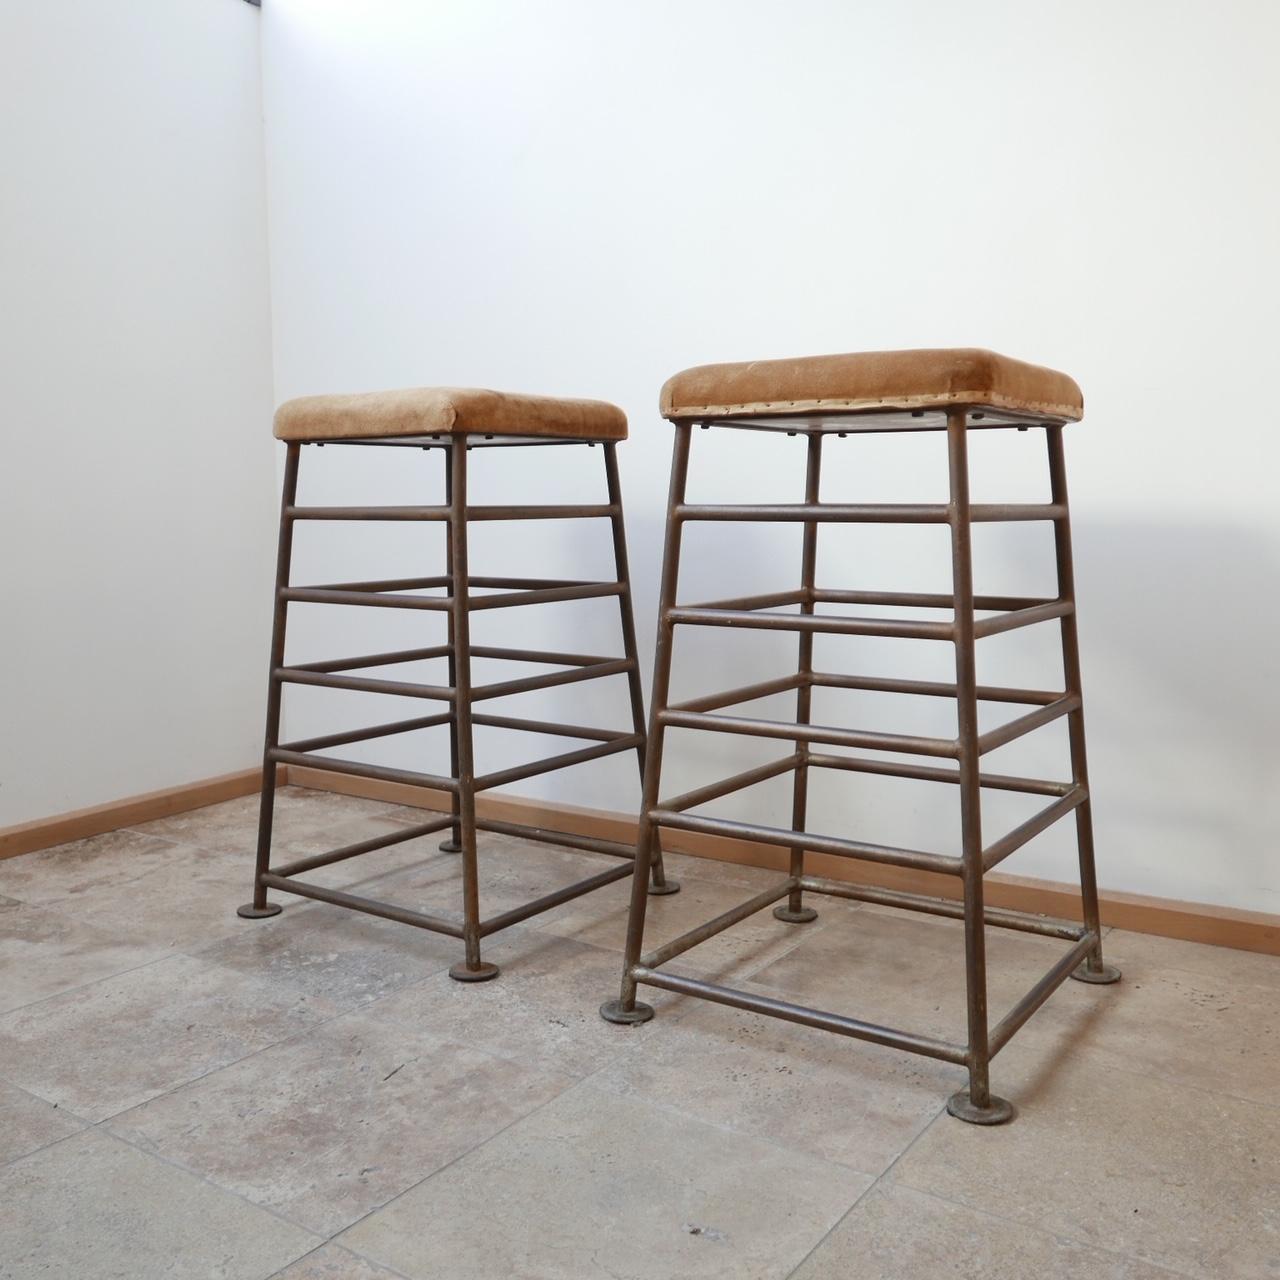 Pair of Tall English Gym Bench Stools 1